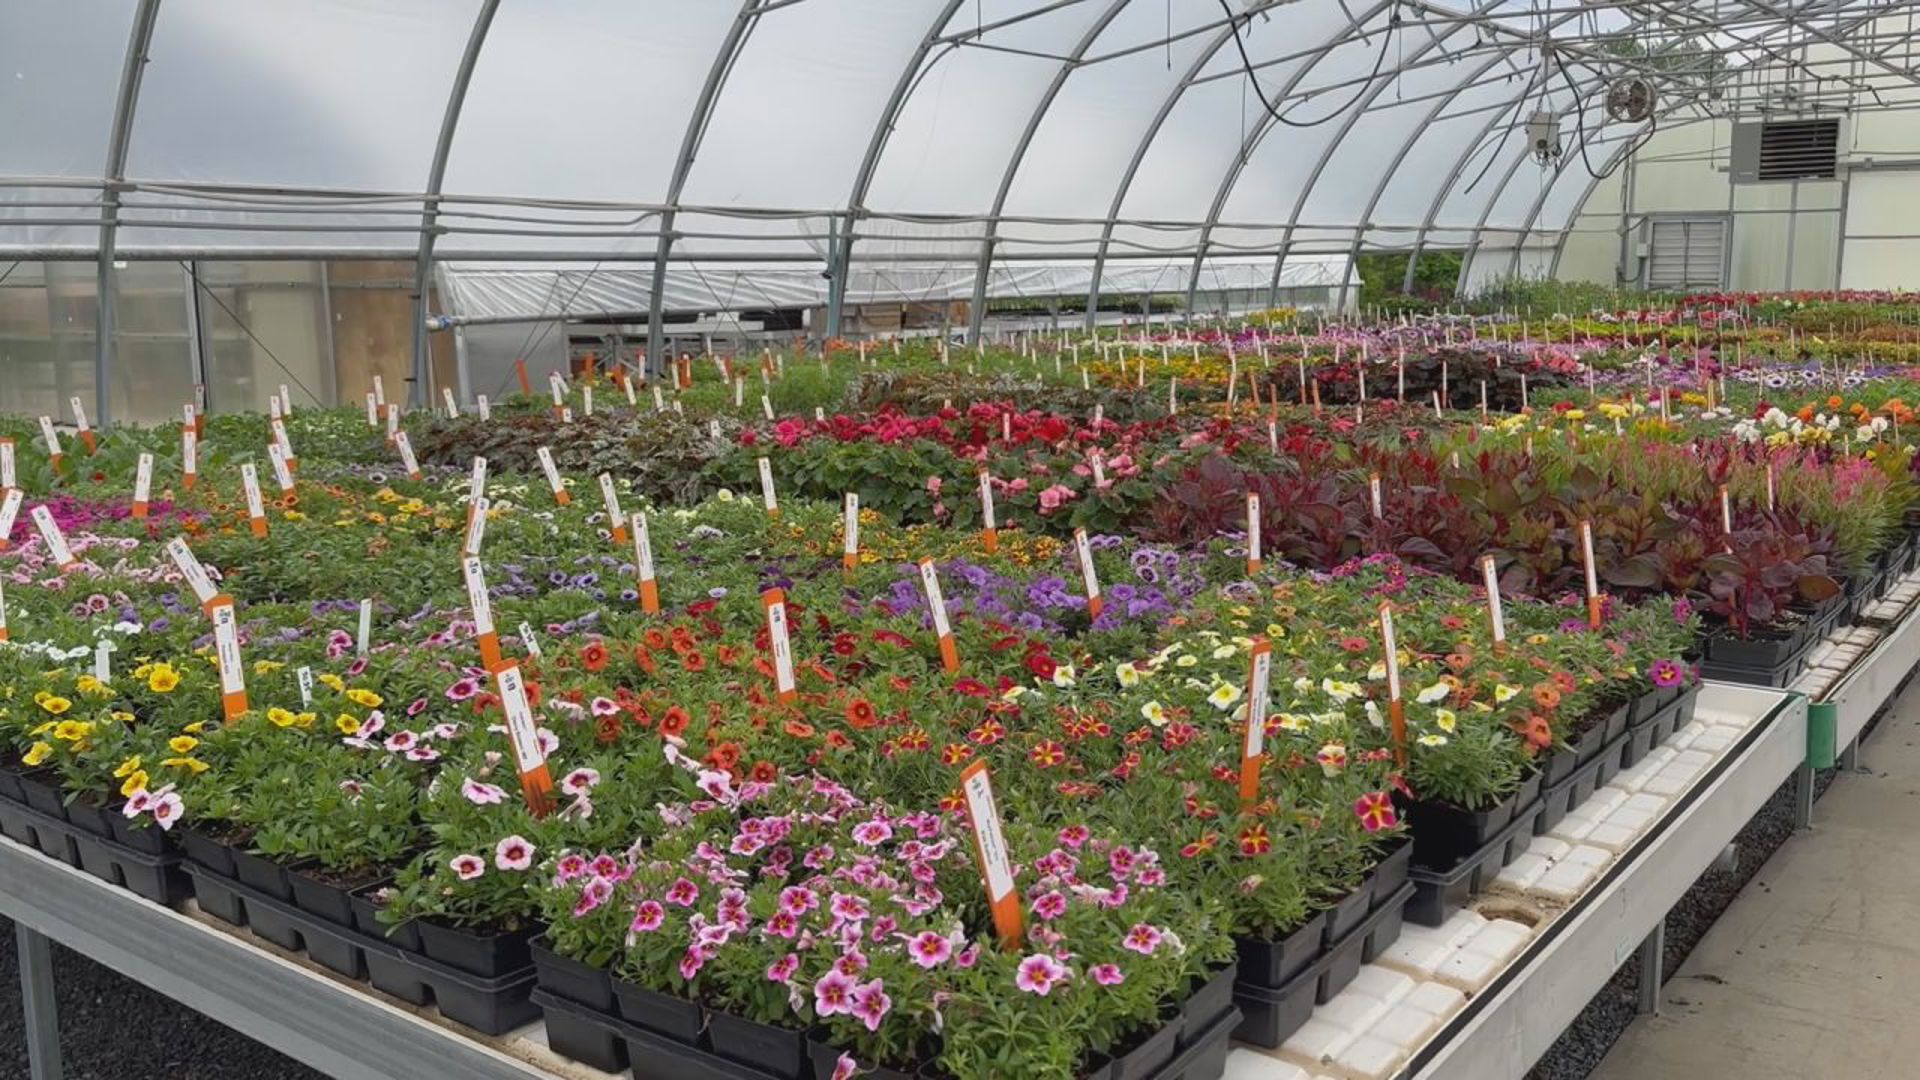 The flower trials are just one of many research programs happening at the Southeast Agricultural Research and Extension Center in Lancaster County.